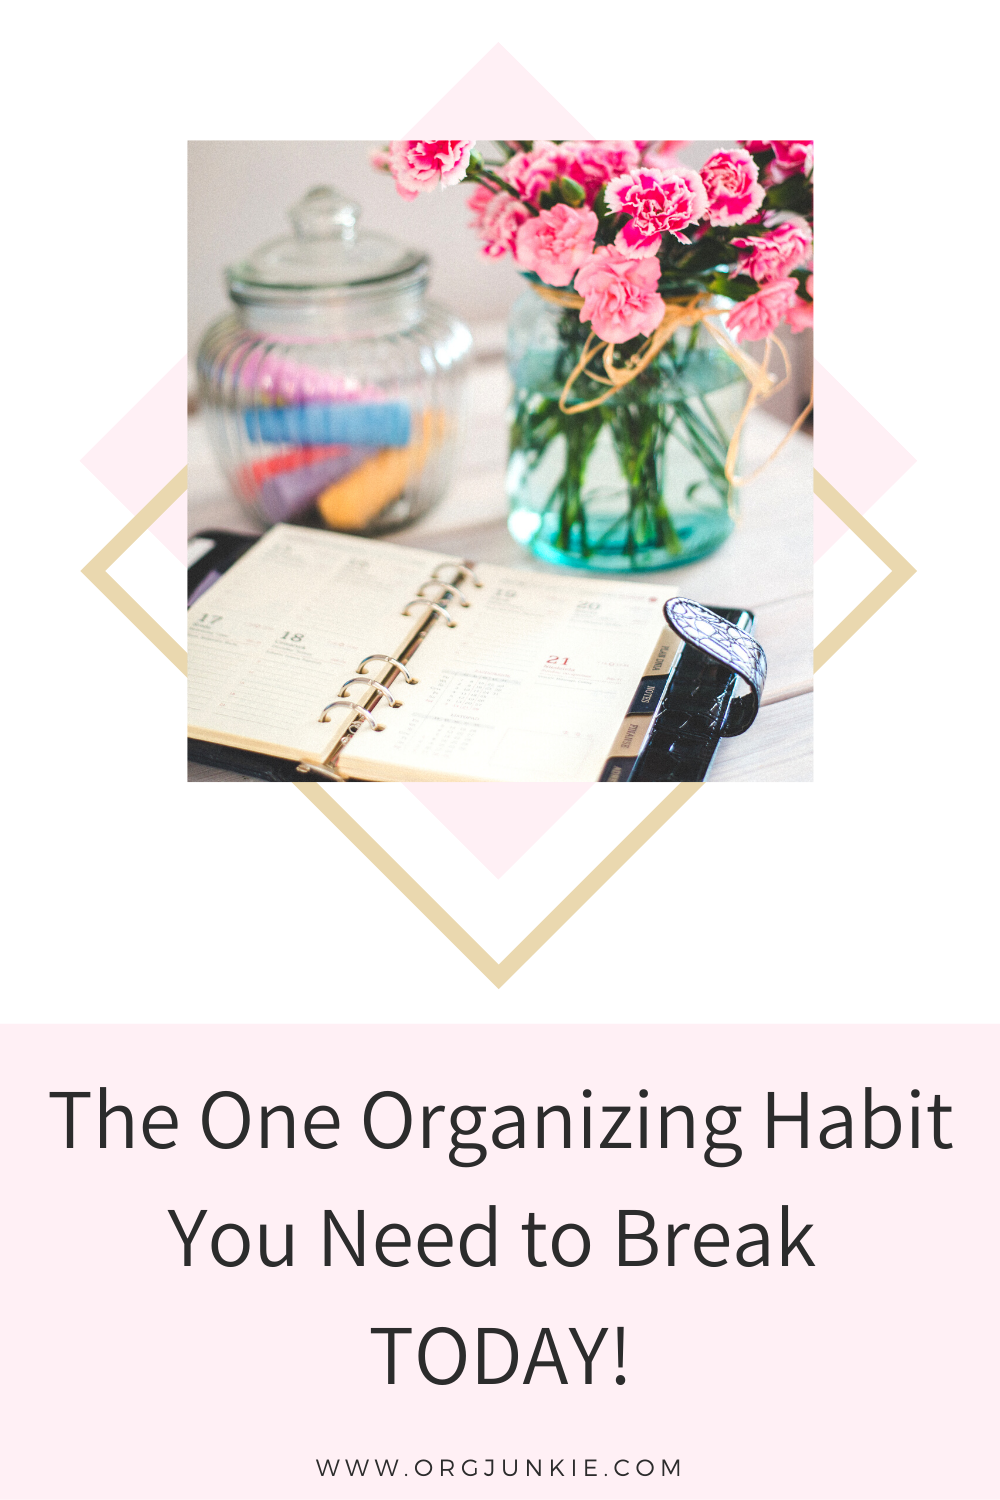 The One Organizing Habit You Need to Break Today at I'm an Organizing Junkie blog